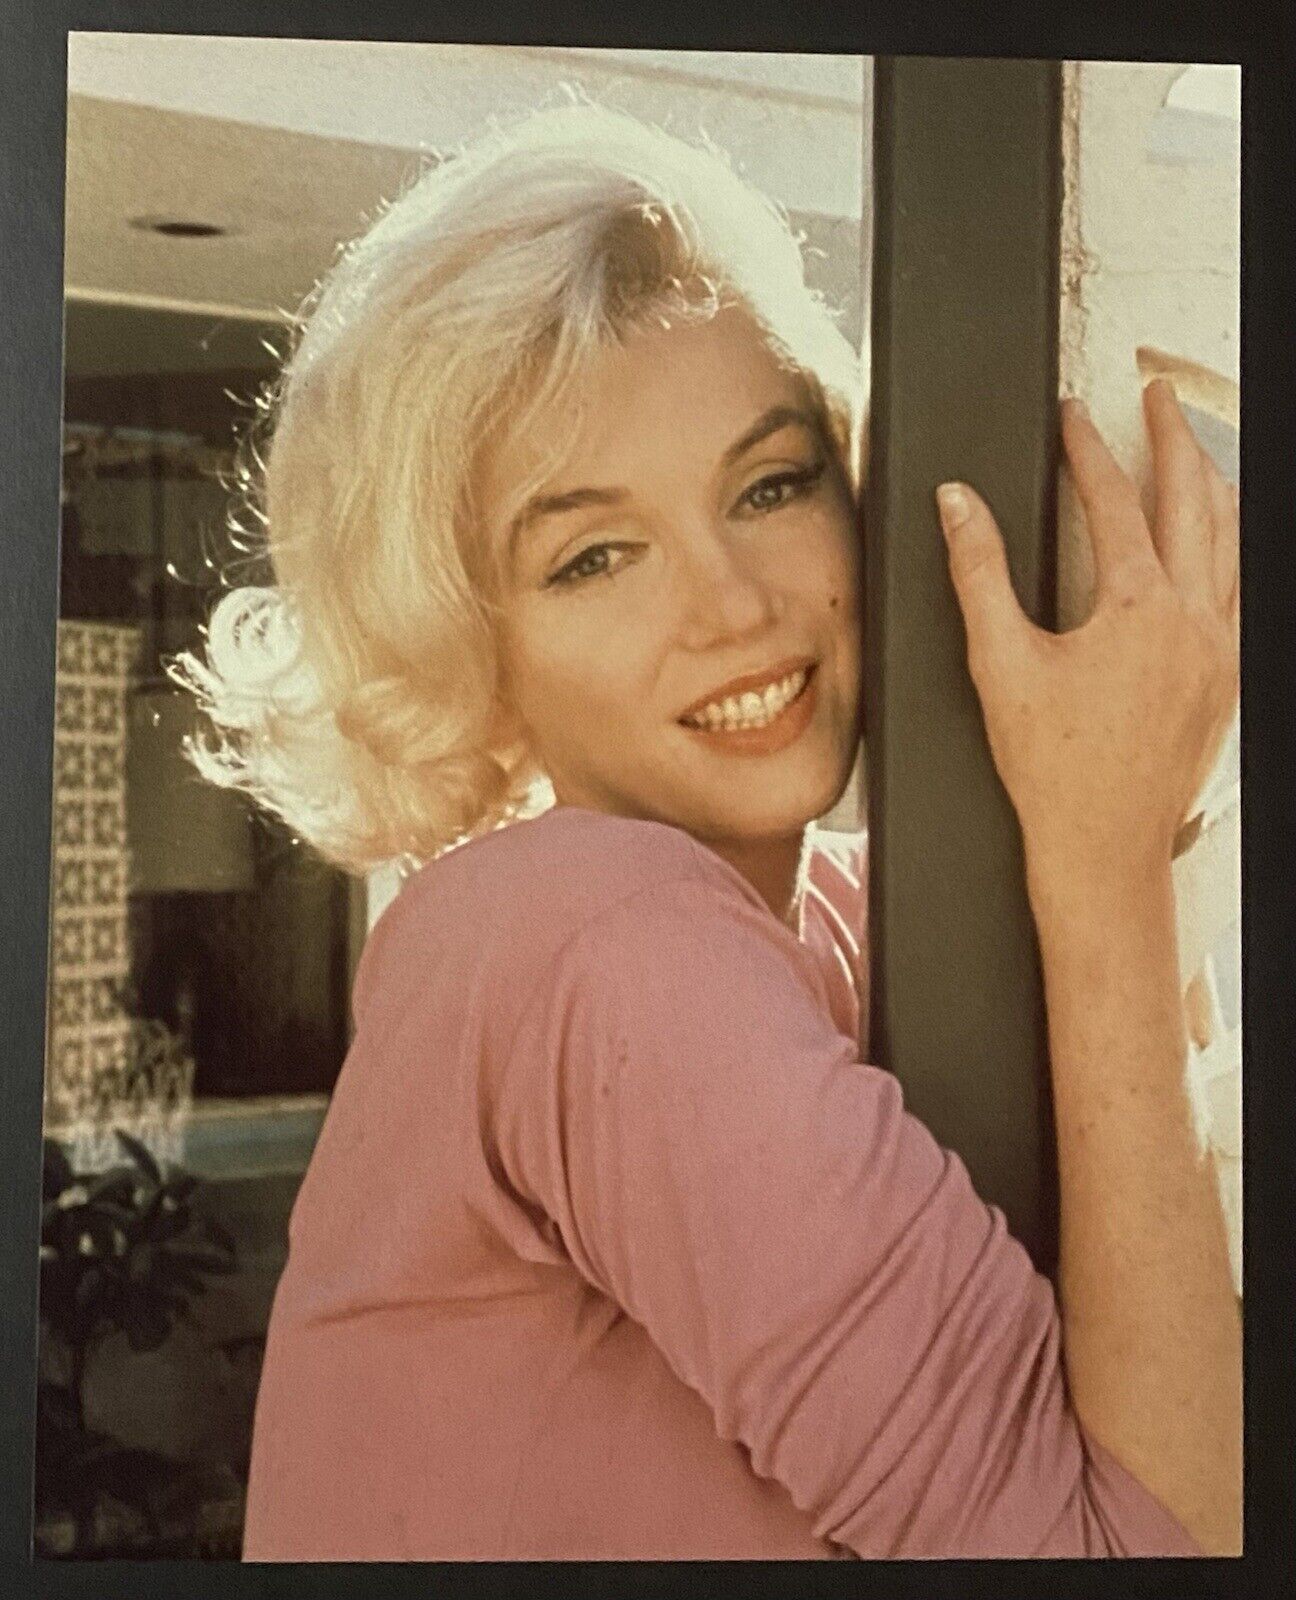 1962 Marilyn Monroe Original photograph by George Barris Stamped Hollywood CA